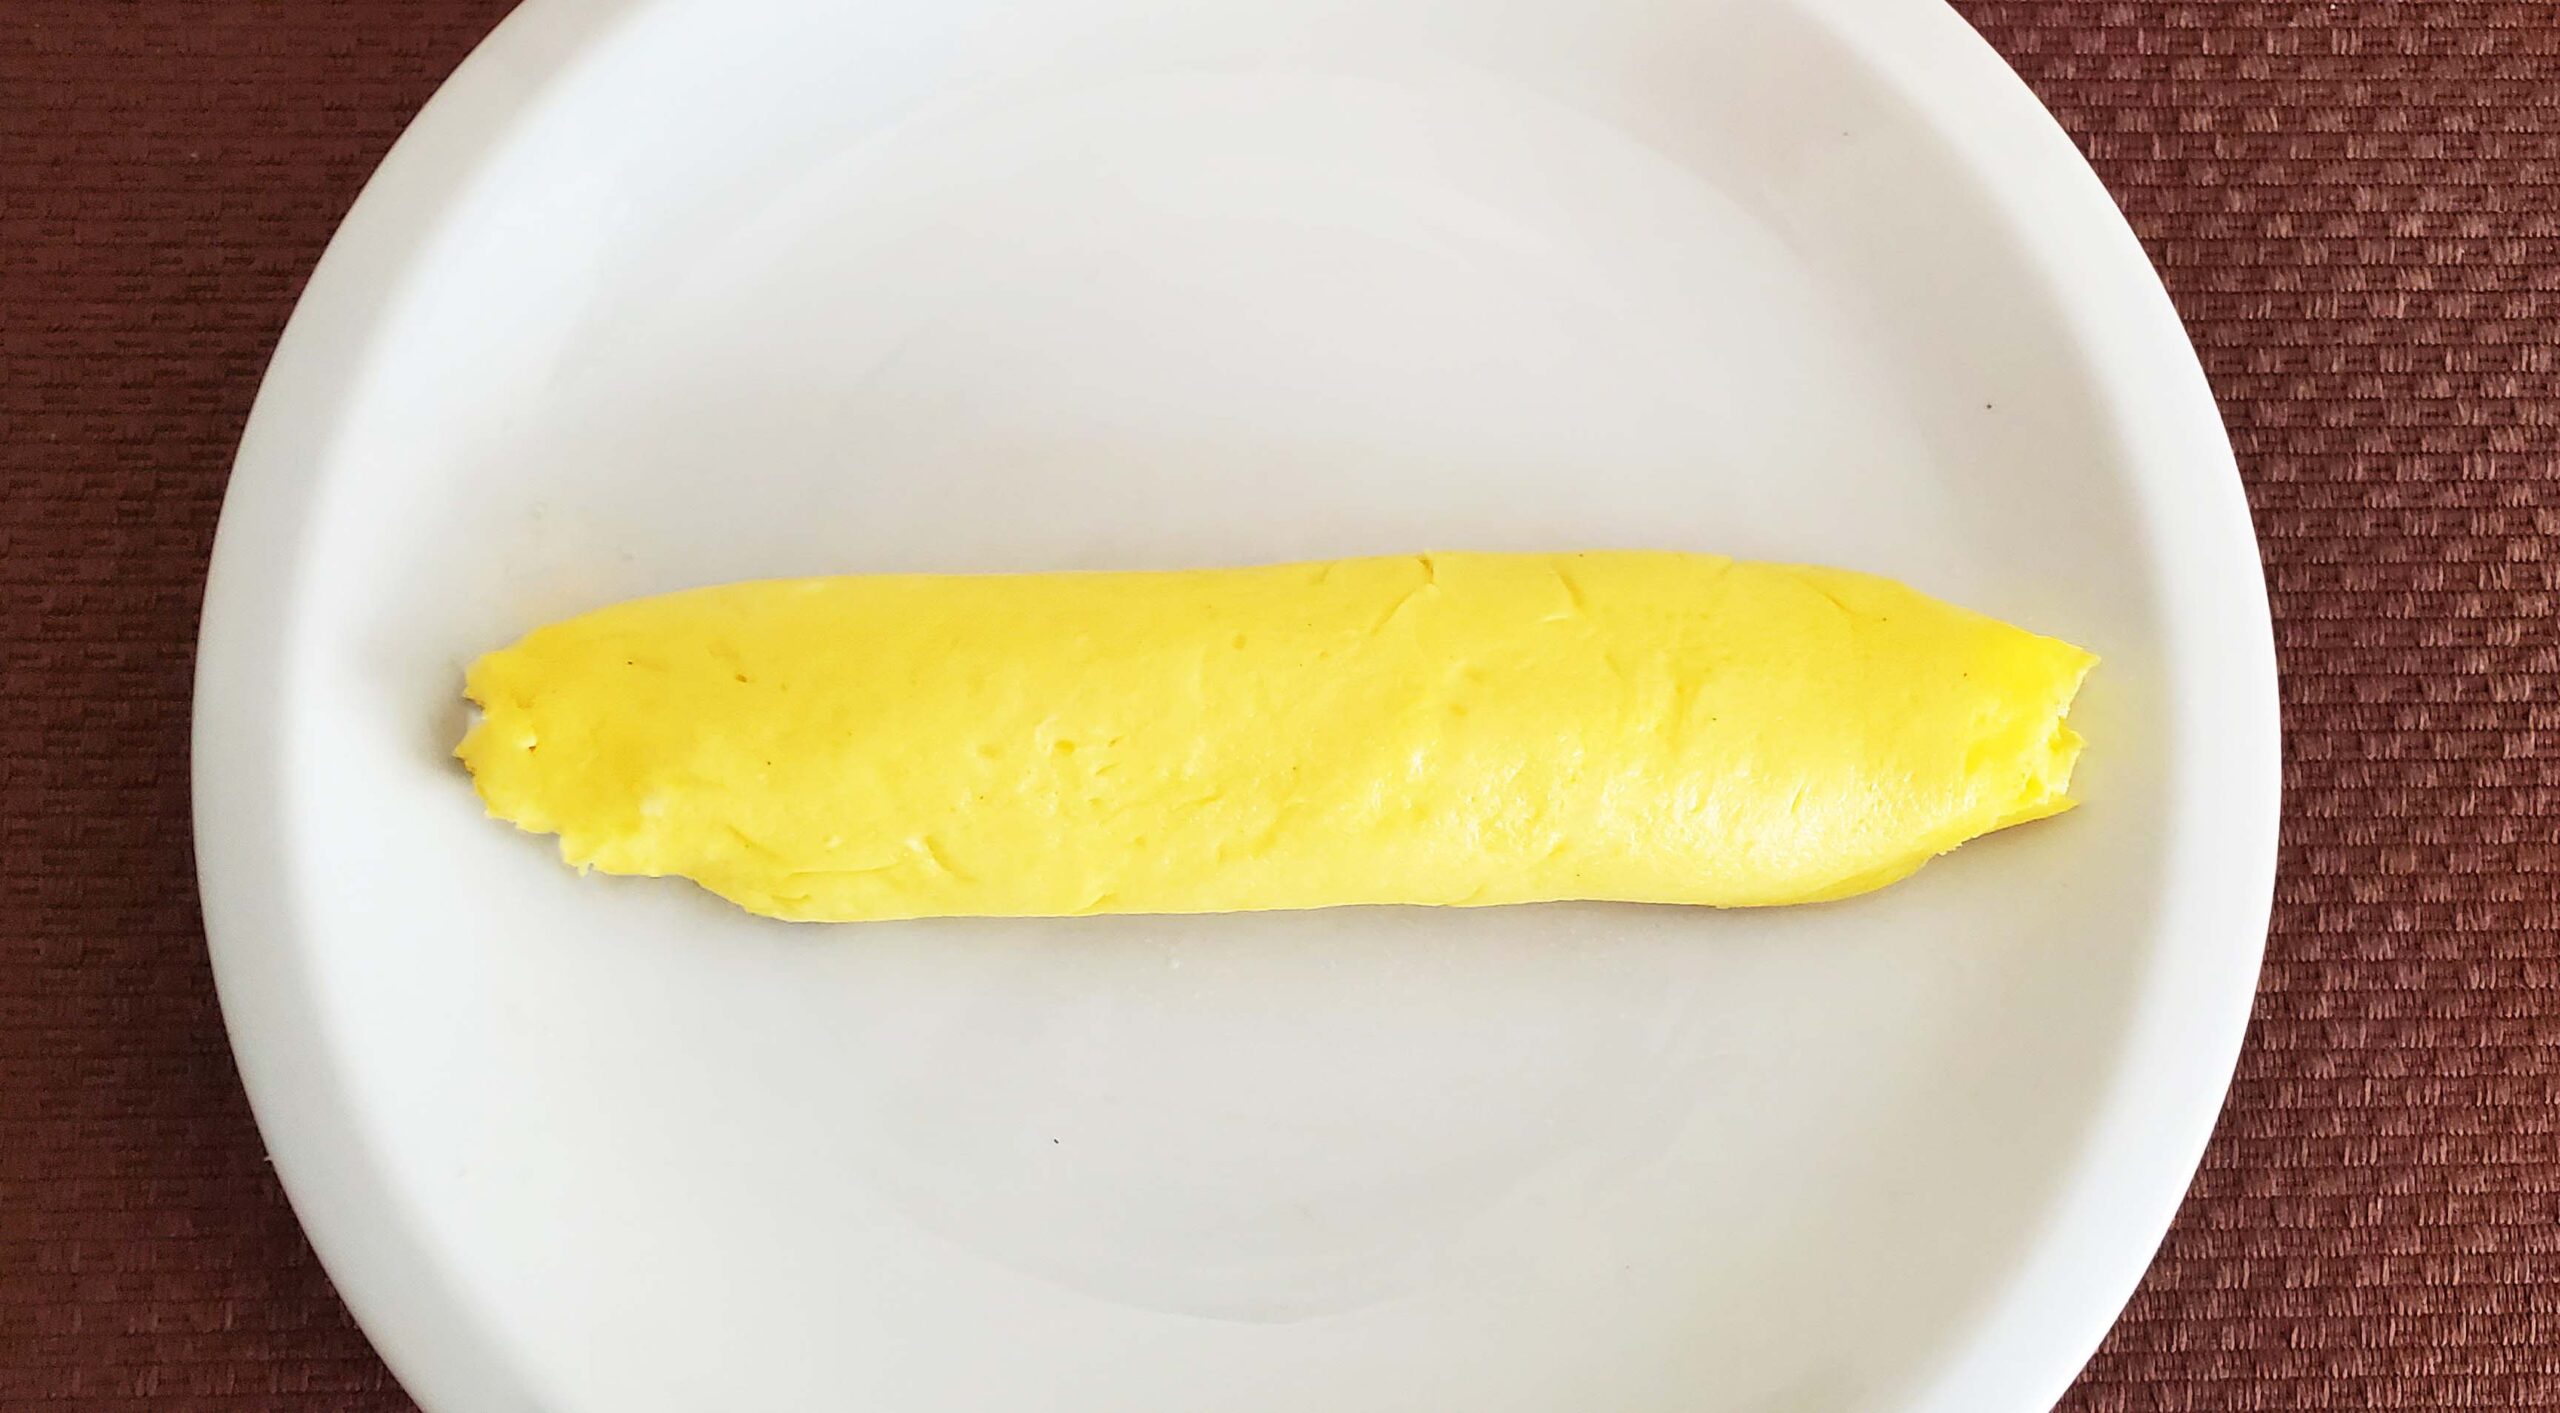 Classic French Omelette Recipe